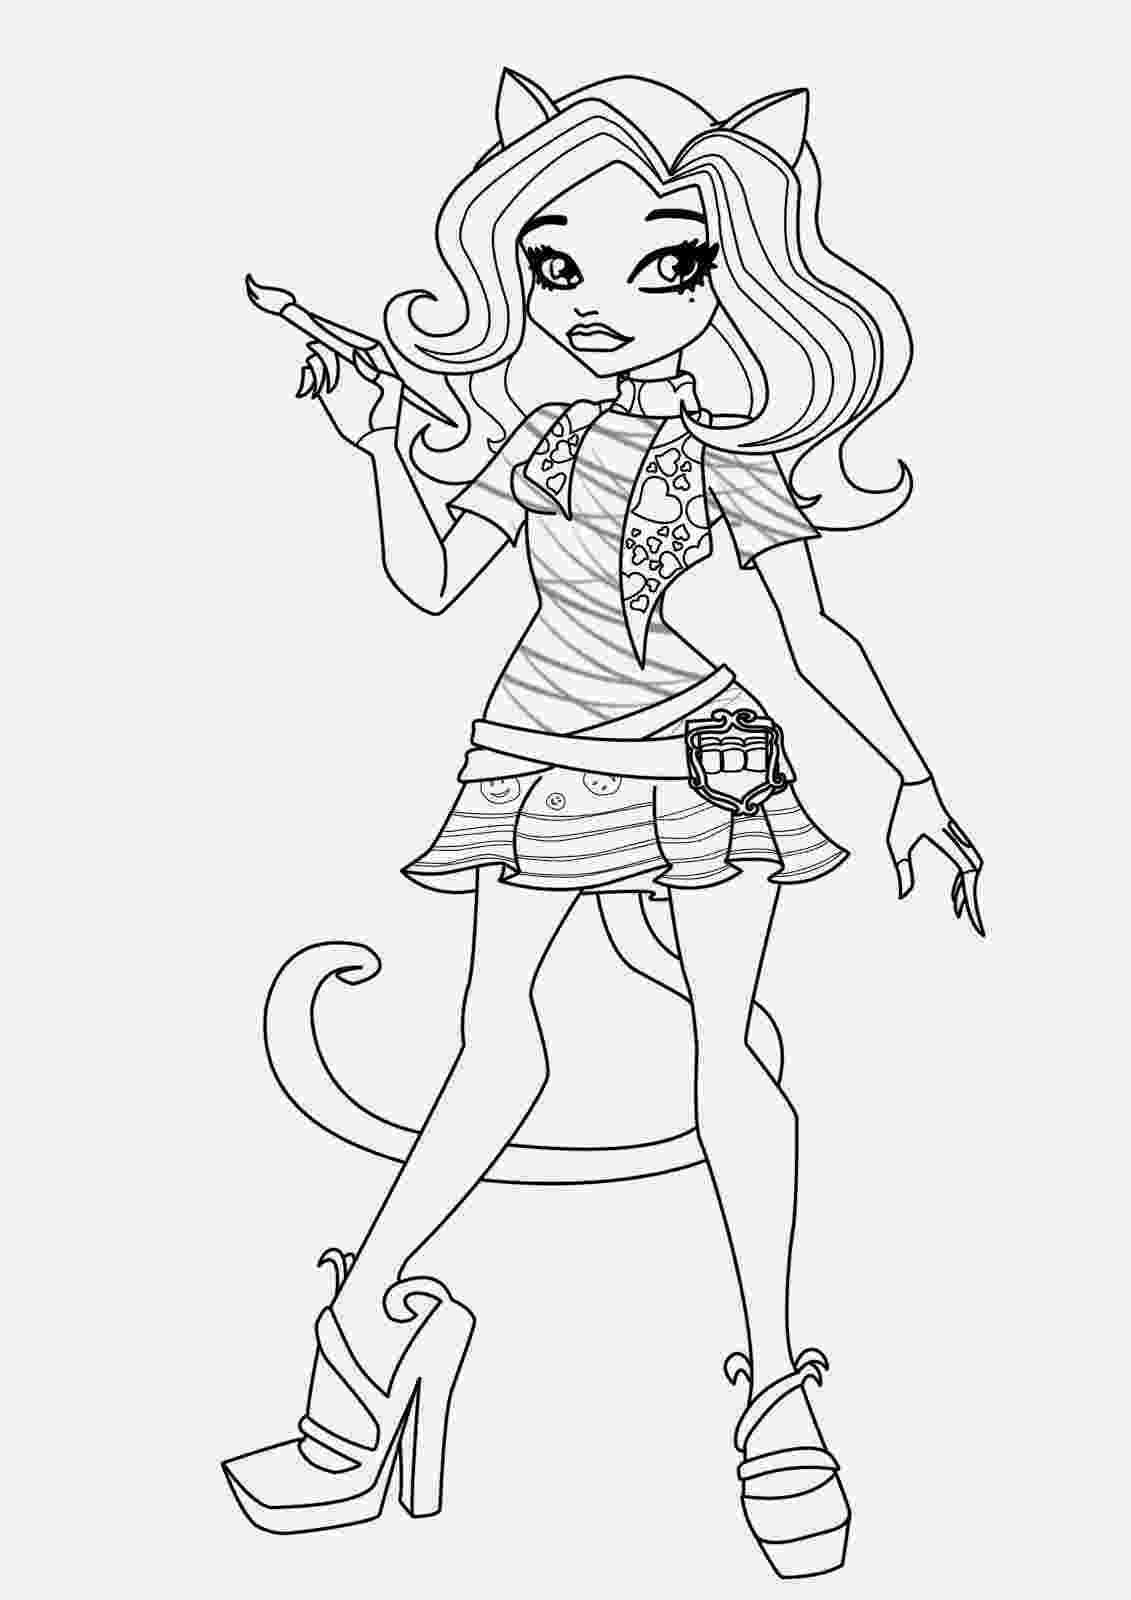 monster high coloring pages printables coloring pages monster high coloring pages free and printable high coloring pages monster printables 